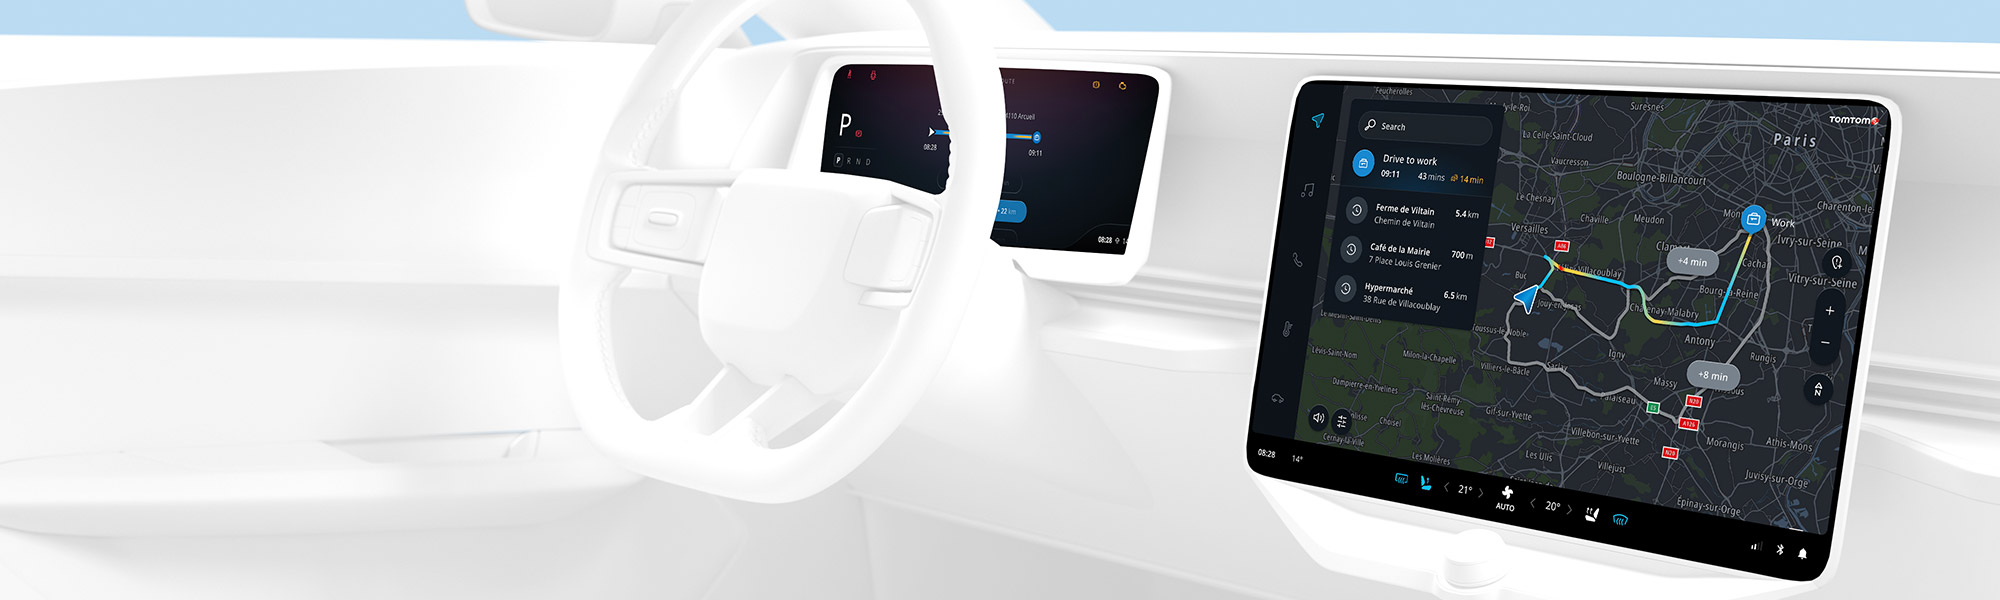 A better navigation experience: Designed for drivers, trusted by carmakers